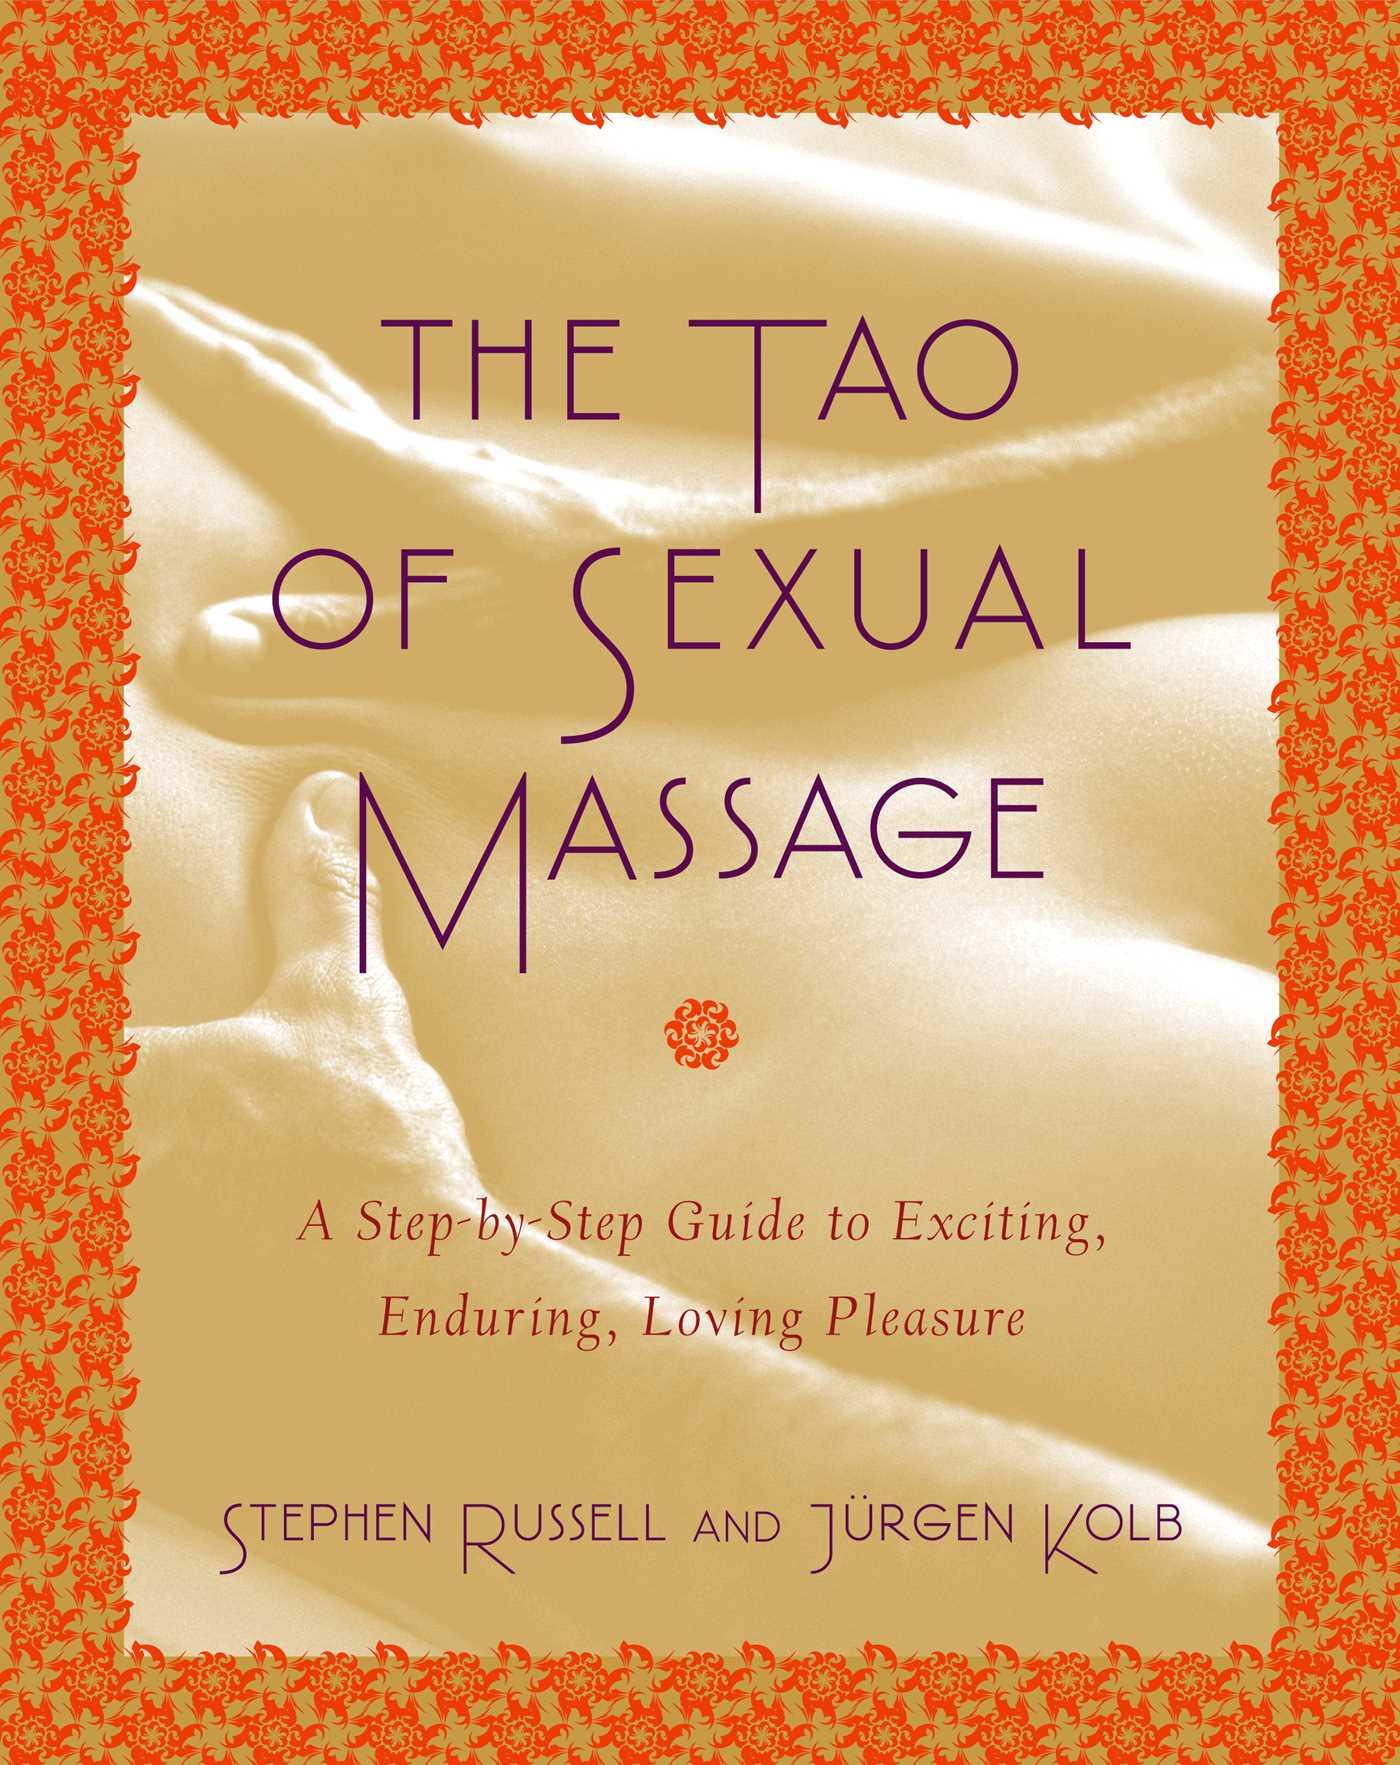 The Tao of Sexual Massage by Stephen Russell